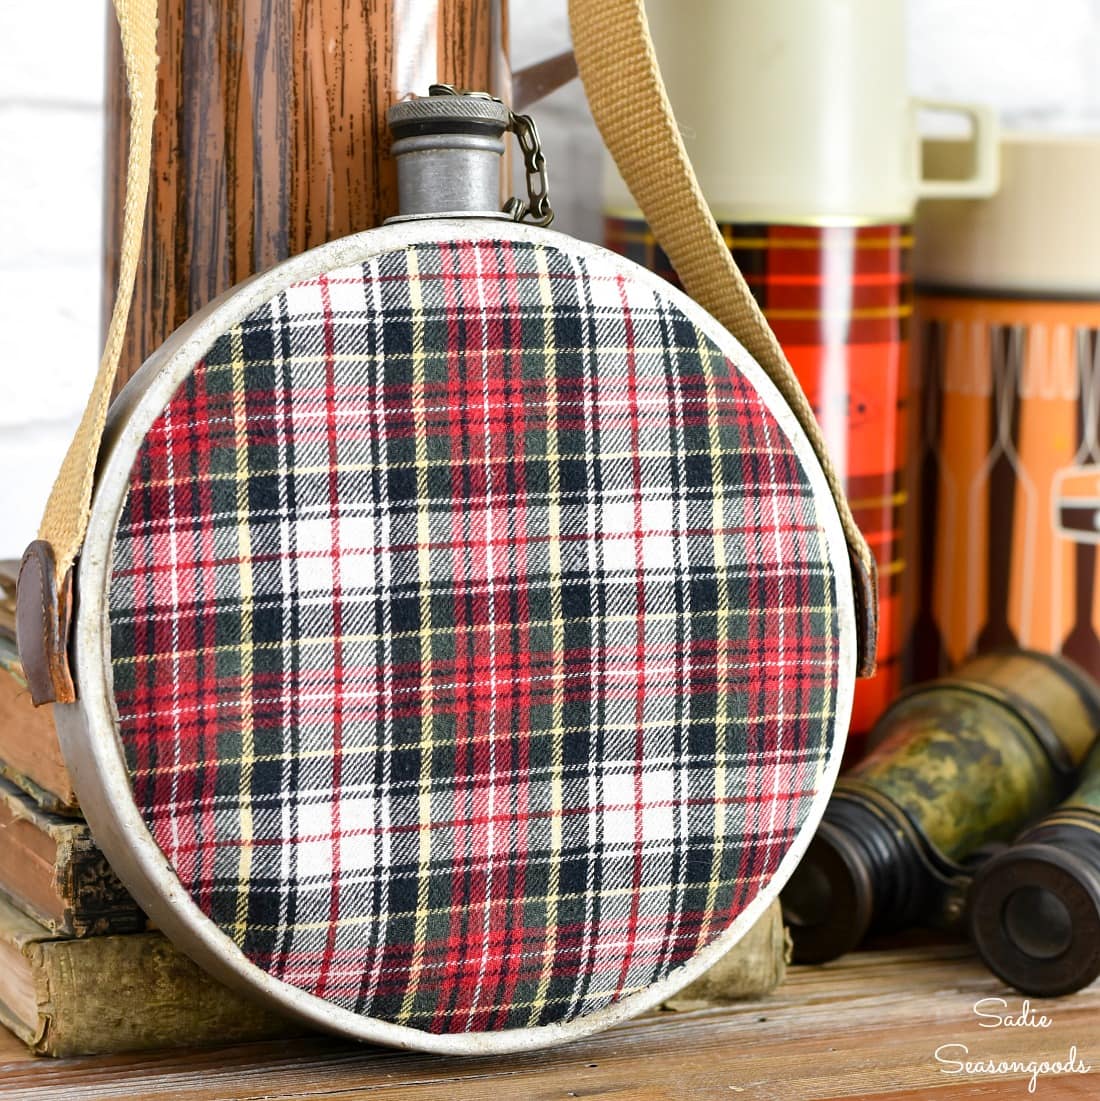 Upcycling a Vintage Canteen with a Flannel Shirt